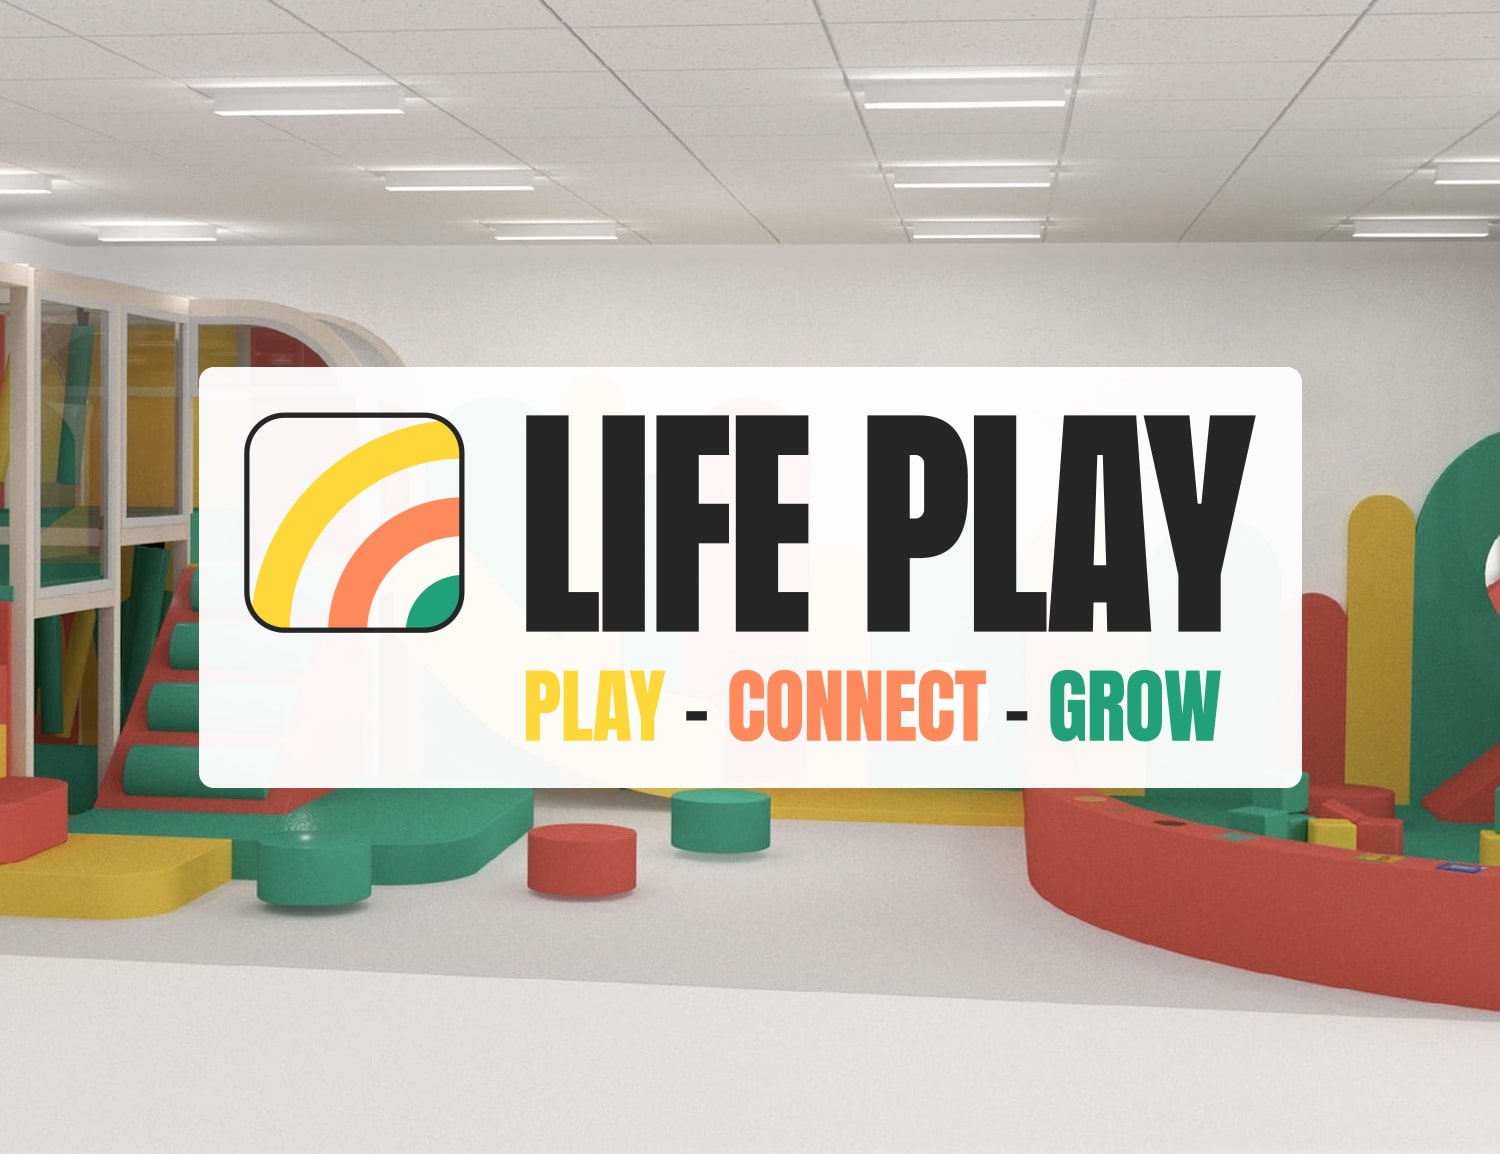 Learn more about LIFE Play